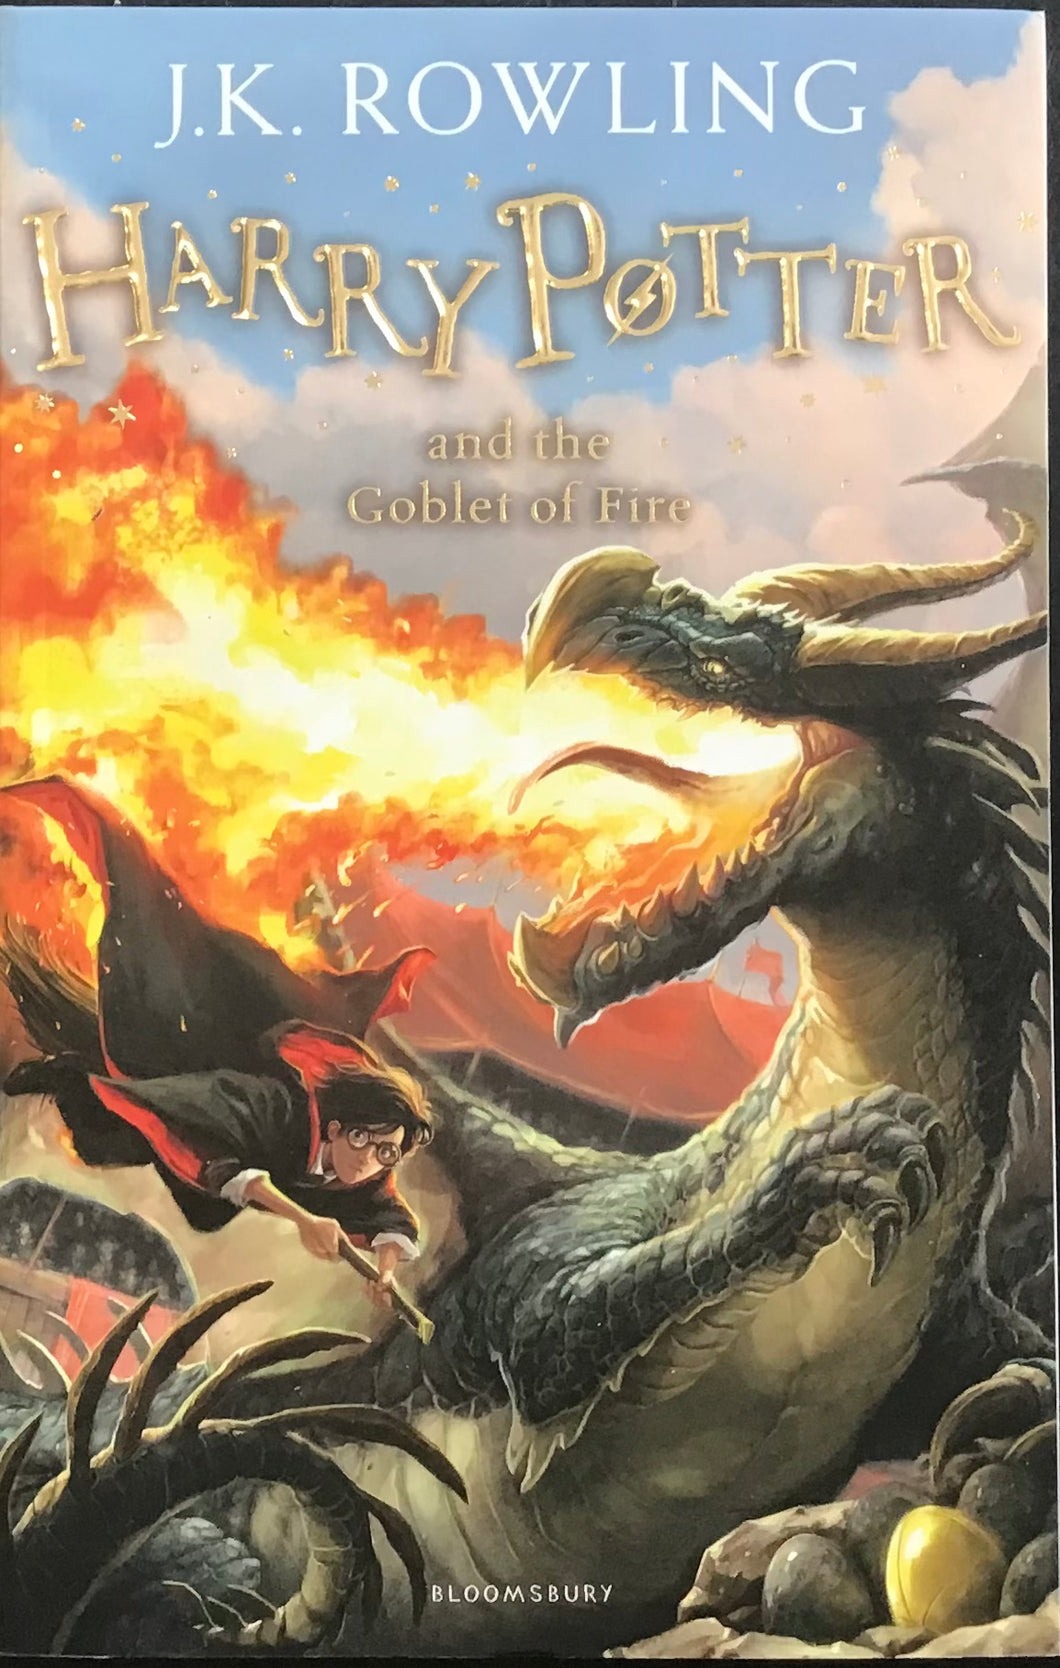 Harry Potter and the Goblet of Fire, J. K. Rowling